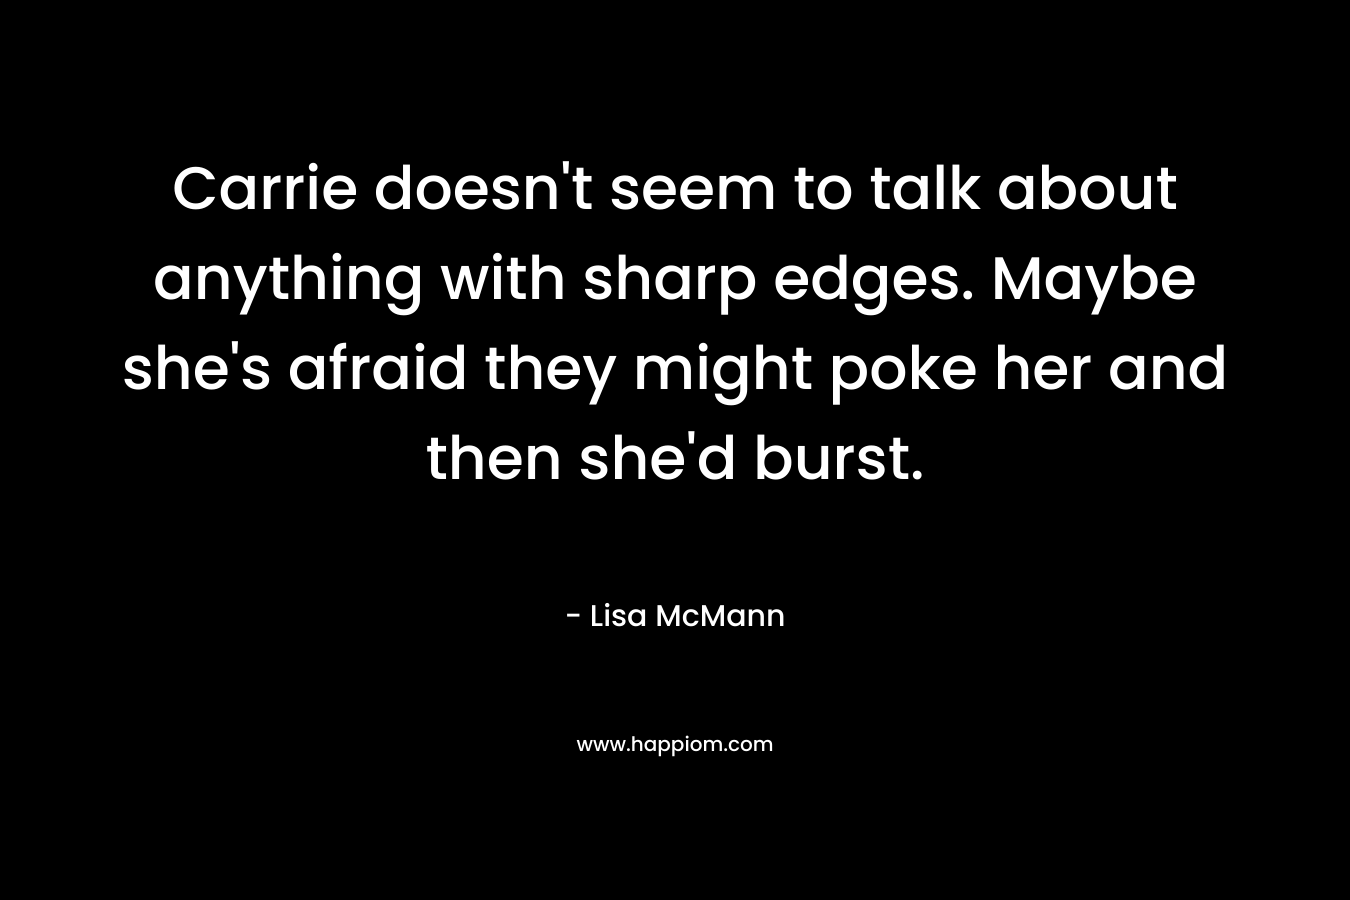 Carrie doesn't seem to talk about anything with sharp edges. Maybe she's afraid they might poke her and then she'd burst.